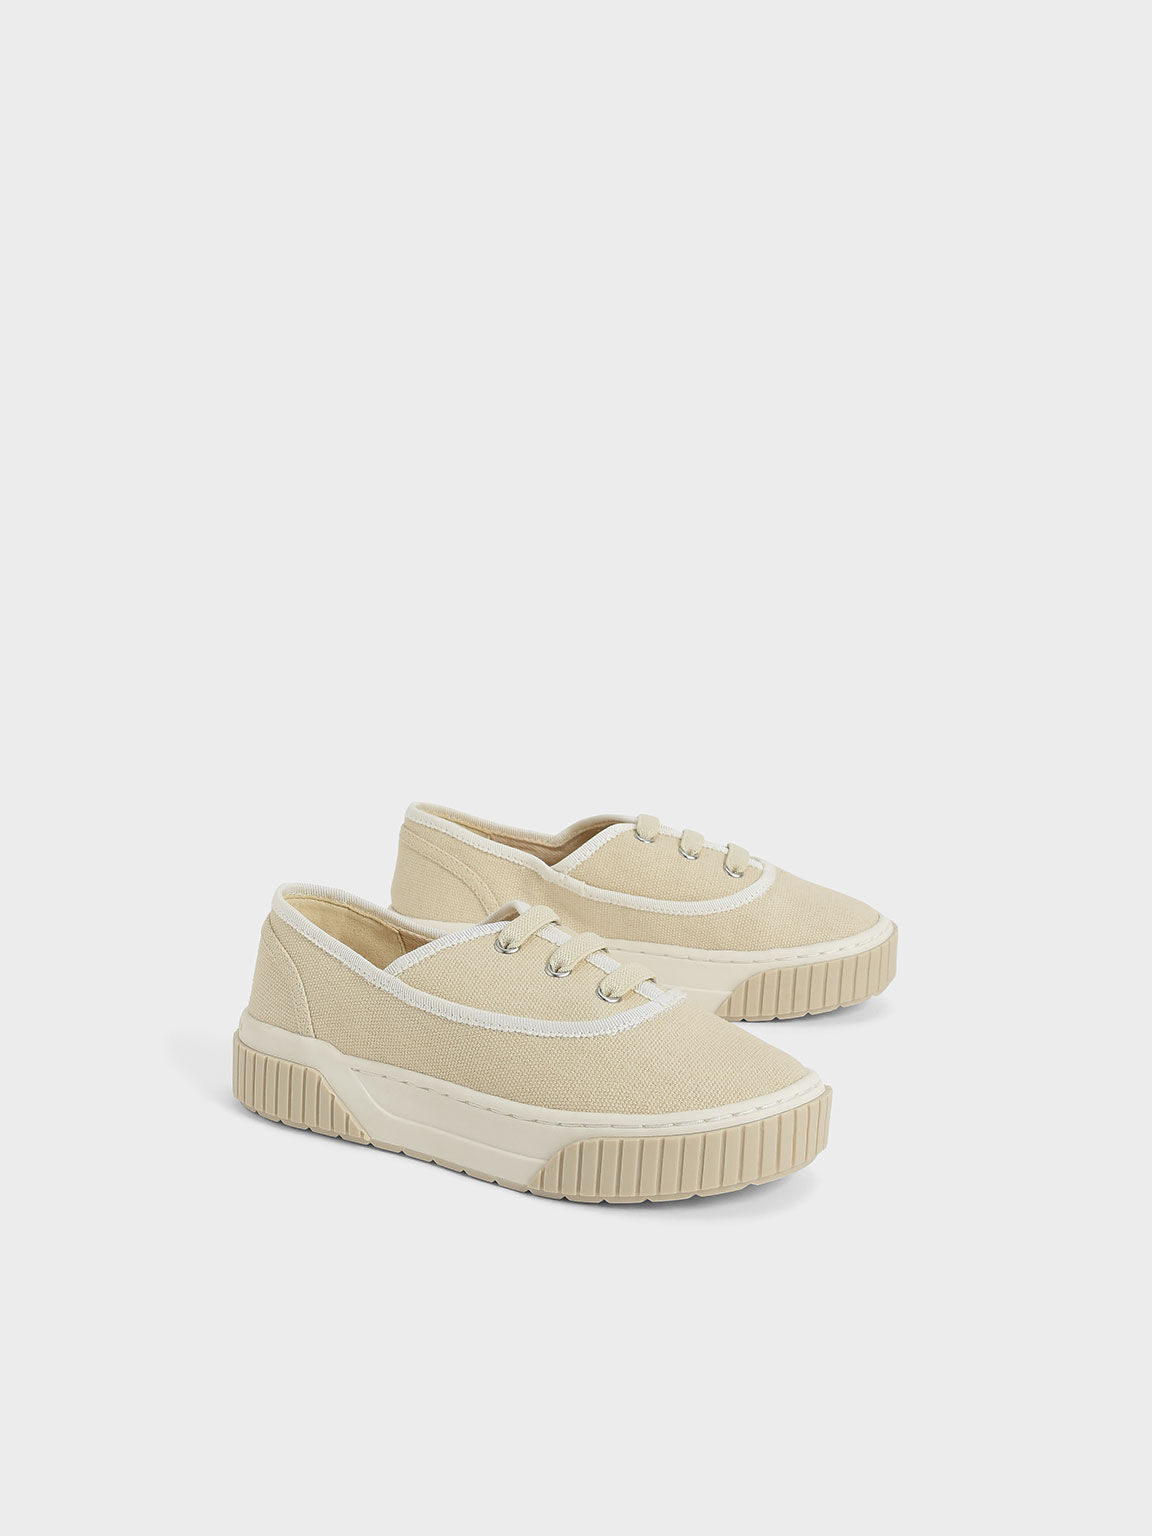 Girls' Canvas & Cotton Slip-On Sneakers, Chalk, hi-res